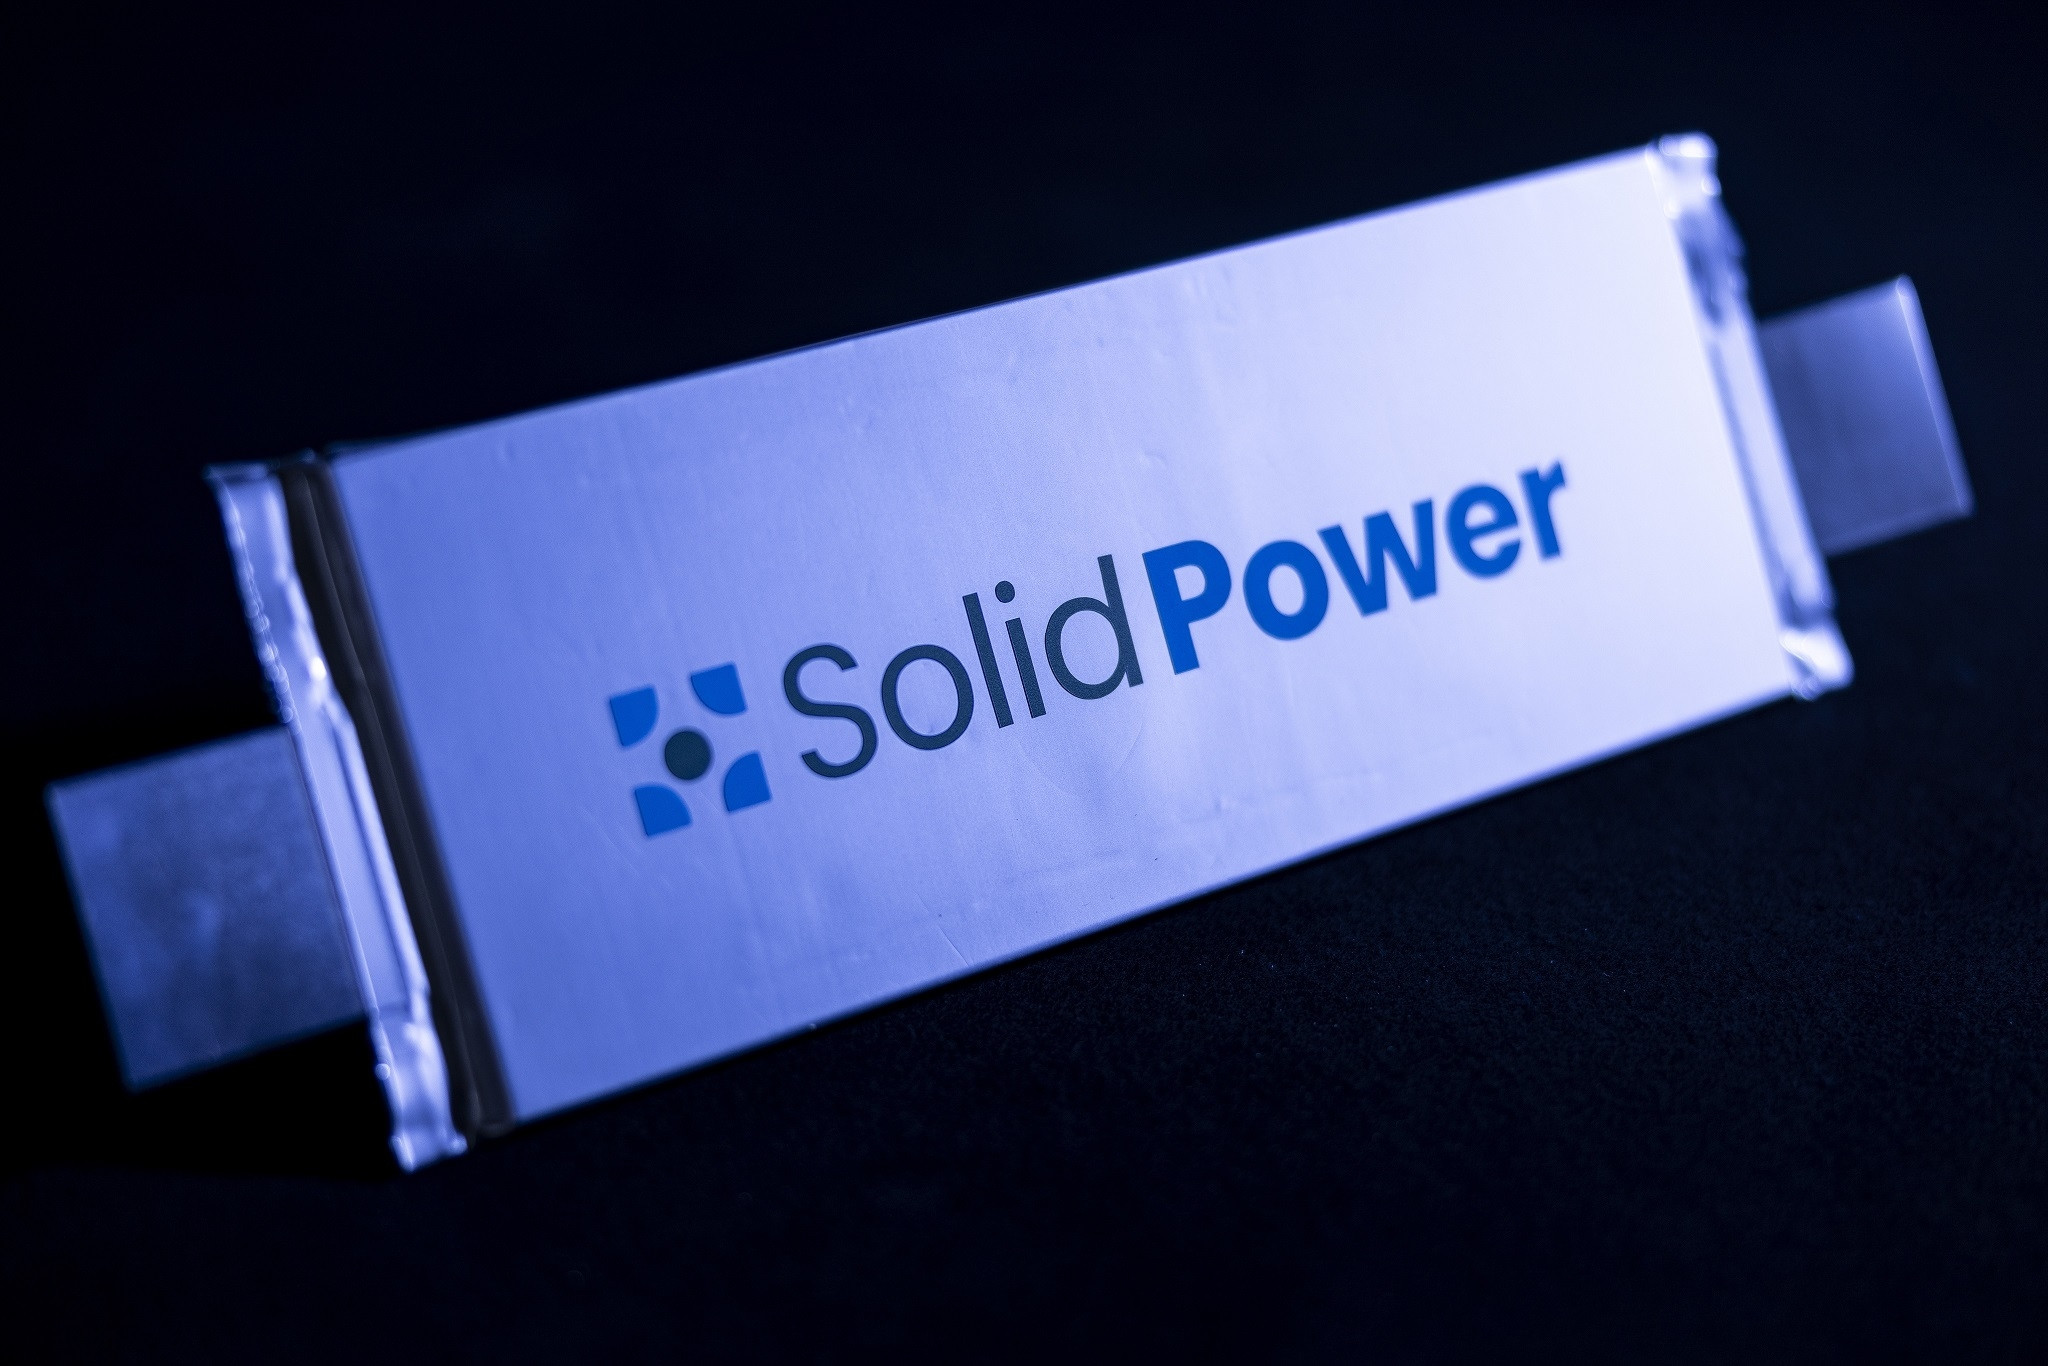 BMW Solid Power batterie solide